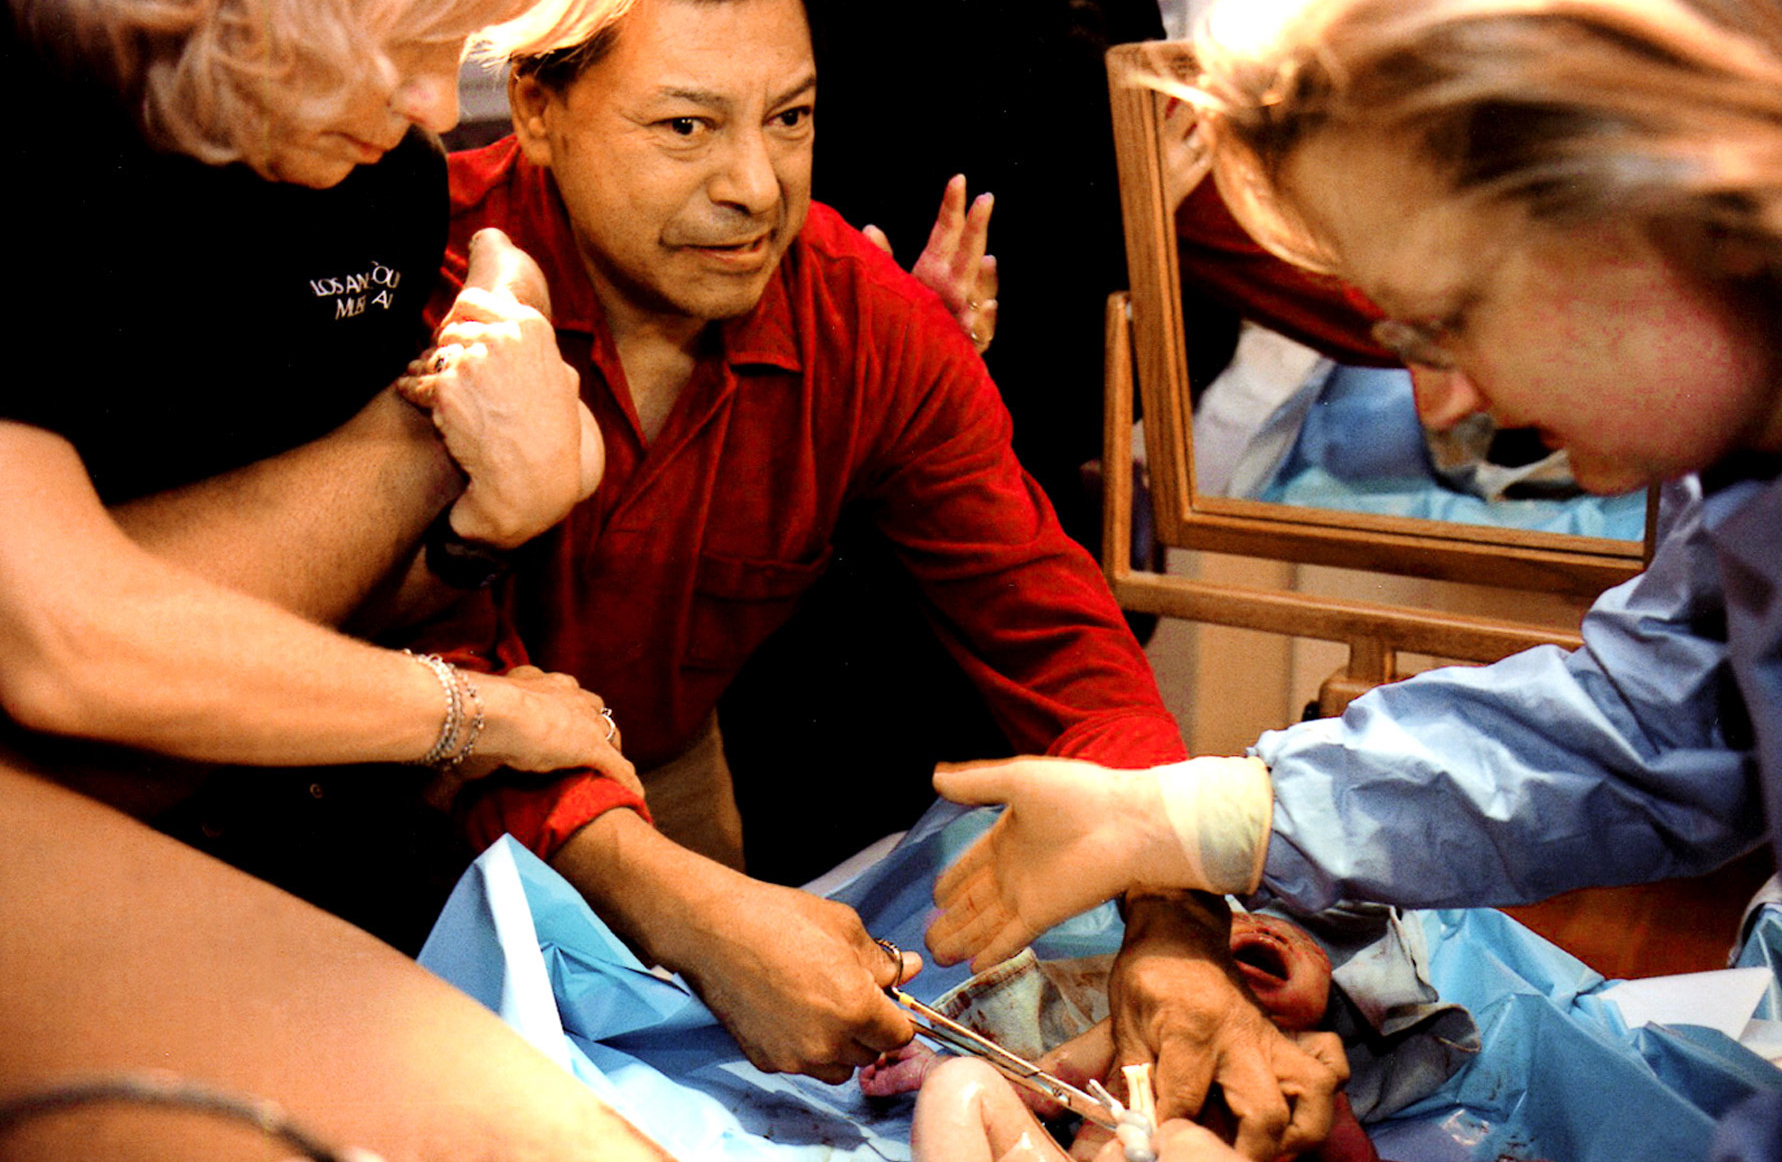 Medical staff and interpreters guide an excited Roy Rios in cutting the umbilical cord of his new daughter, Shanice Morgan-Rios. {quote}I hope my baby is not born deaf-blind with Usher's syndrome, like me,{quote} said Rios, who is deaf-blind and has three other siblings with the disease. Usher's is hereditary, there is no trreatment or cure. Rios already has a son, who was born without Usher's. Tests show that his daughter is able to hear. Doctors will test her later to determine whether she has any vision problems.